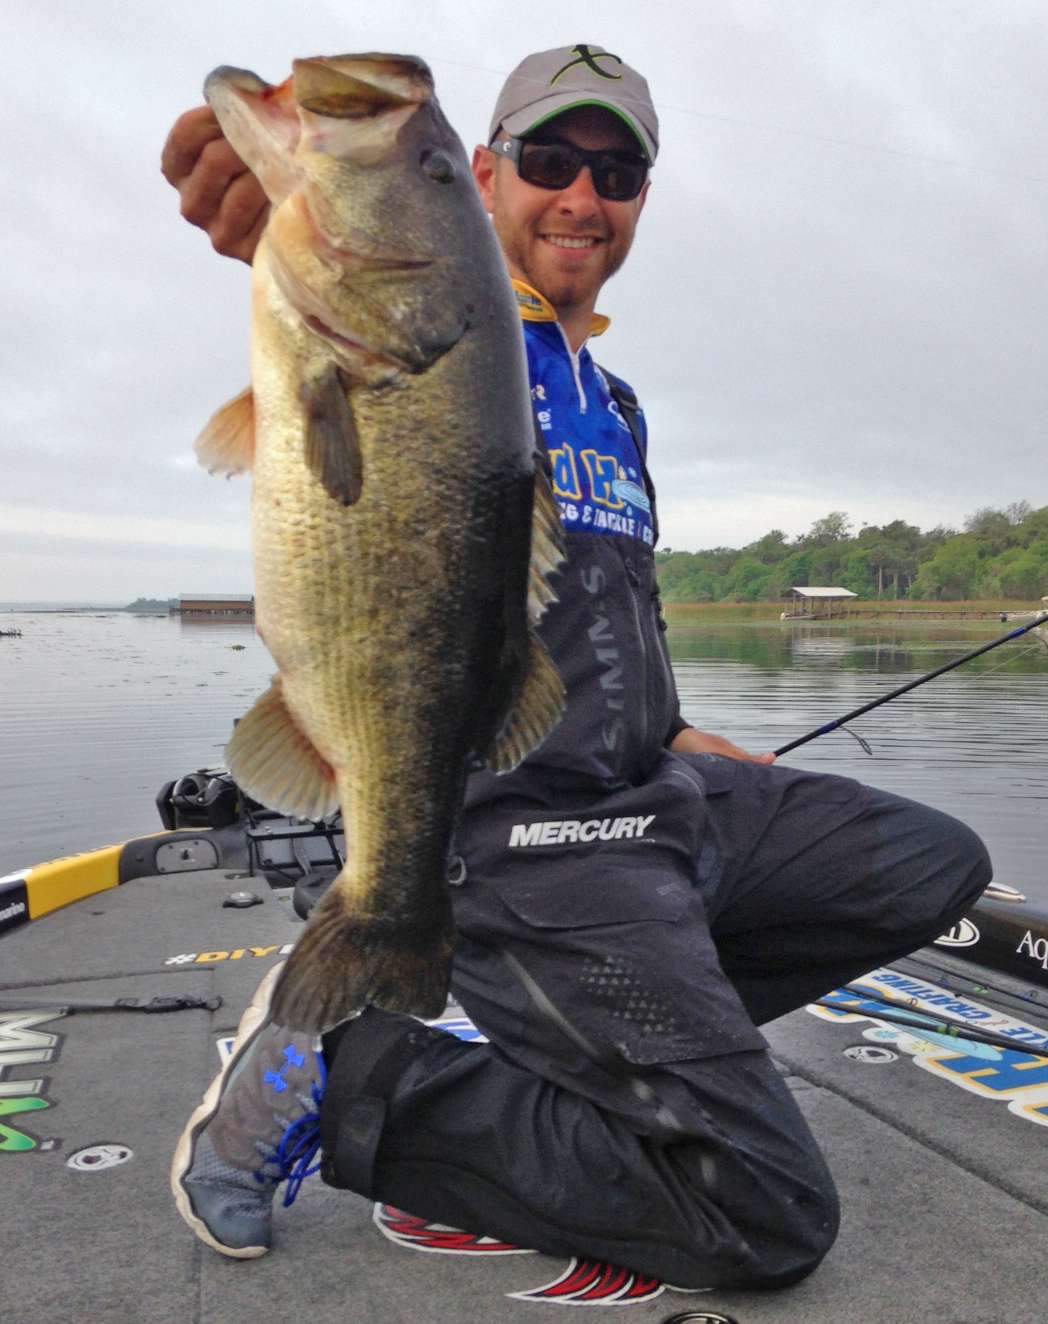 Brandon Lester got off to a fast start, going right to this beauty and landing it on his fourth cast. Later he said he didnât think the 9-3 lunker was that big. âHonestly, I thought the fish was about a 6 1/2- or 7-pounder. Once they get over 7 pounds, when theyâre sitting in the water, itâs hard to tell.â